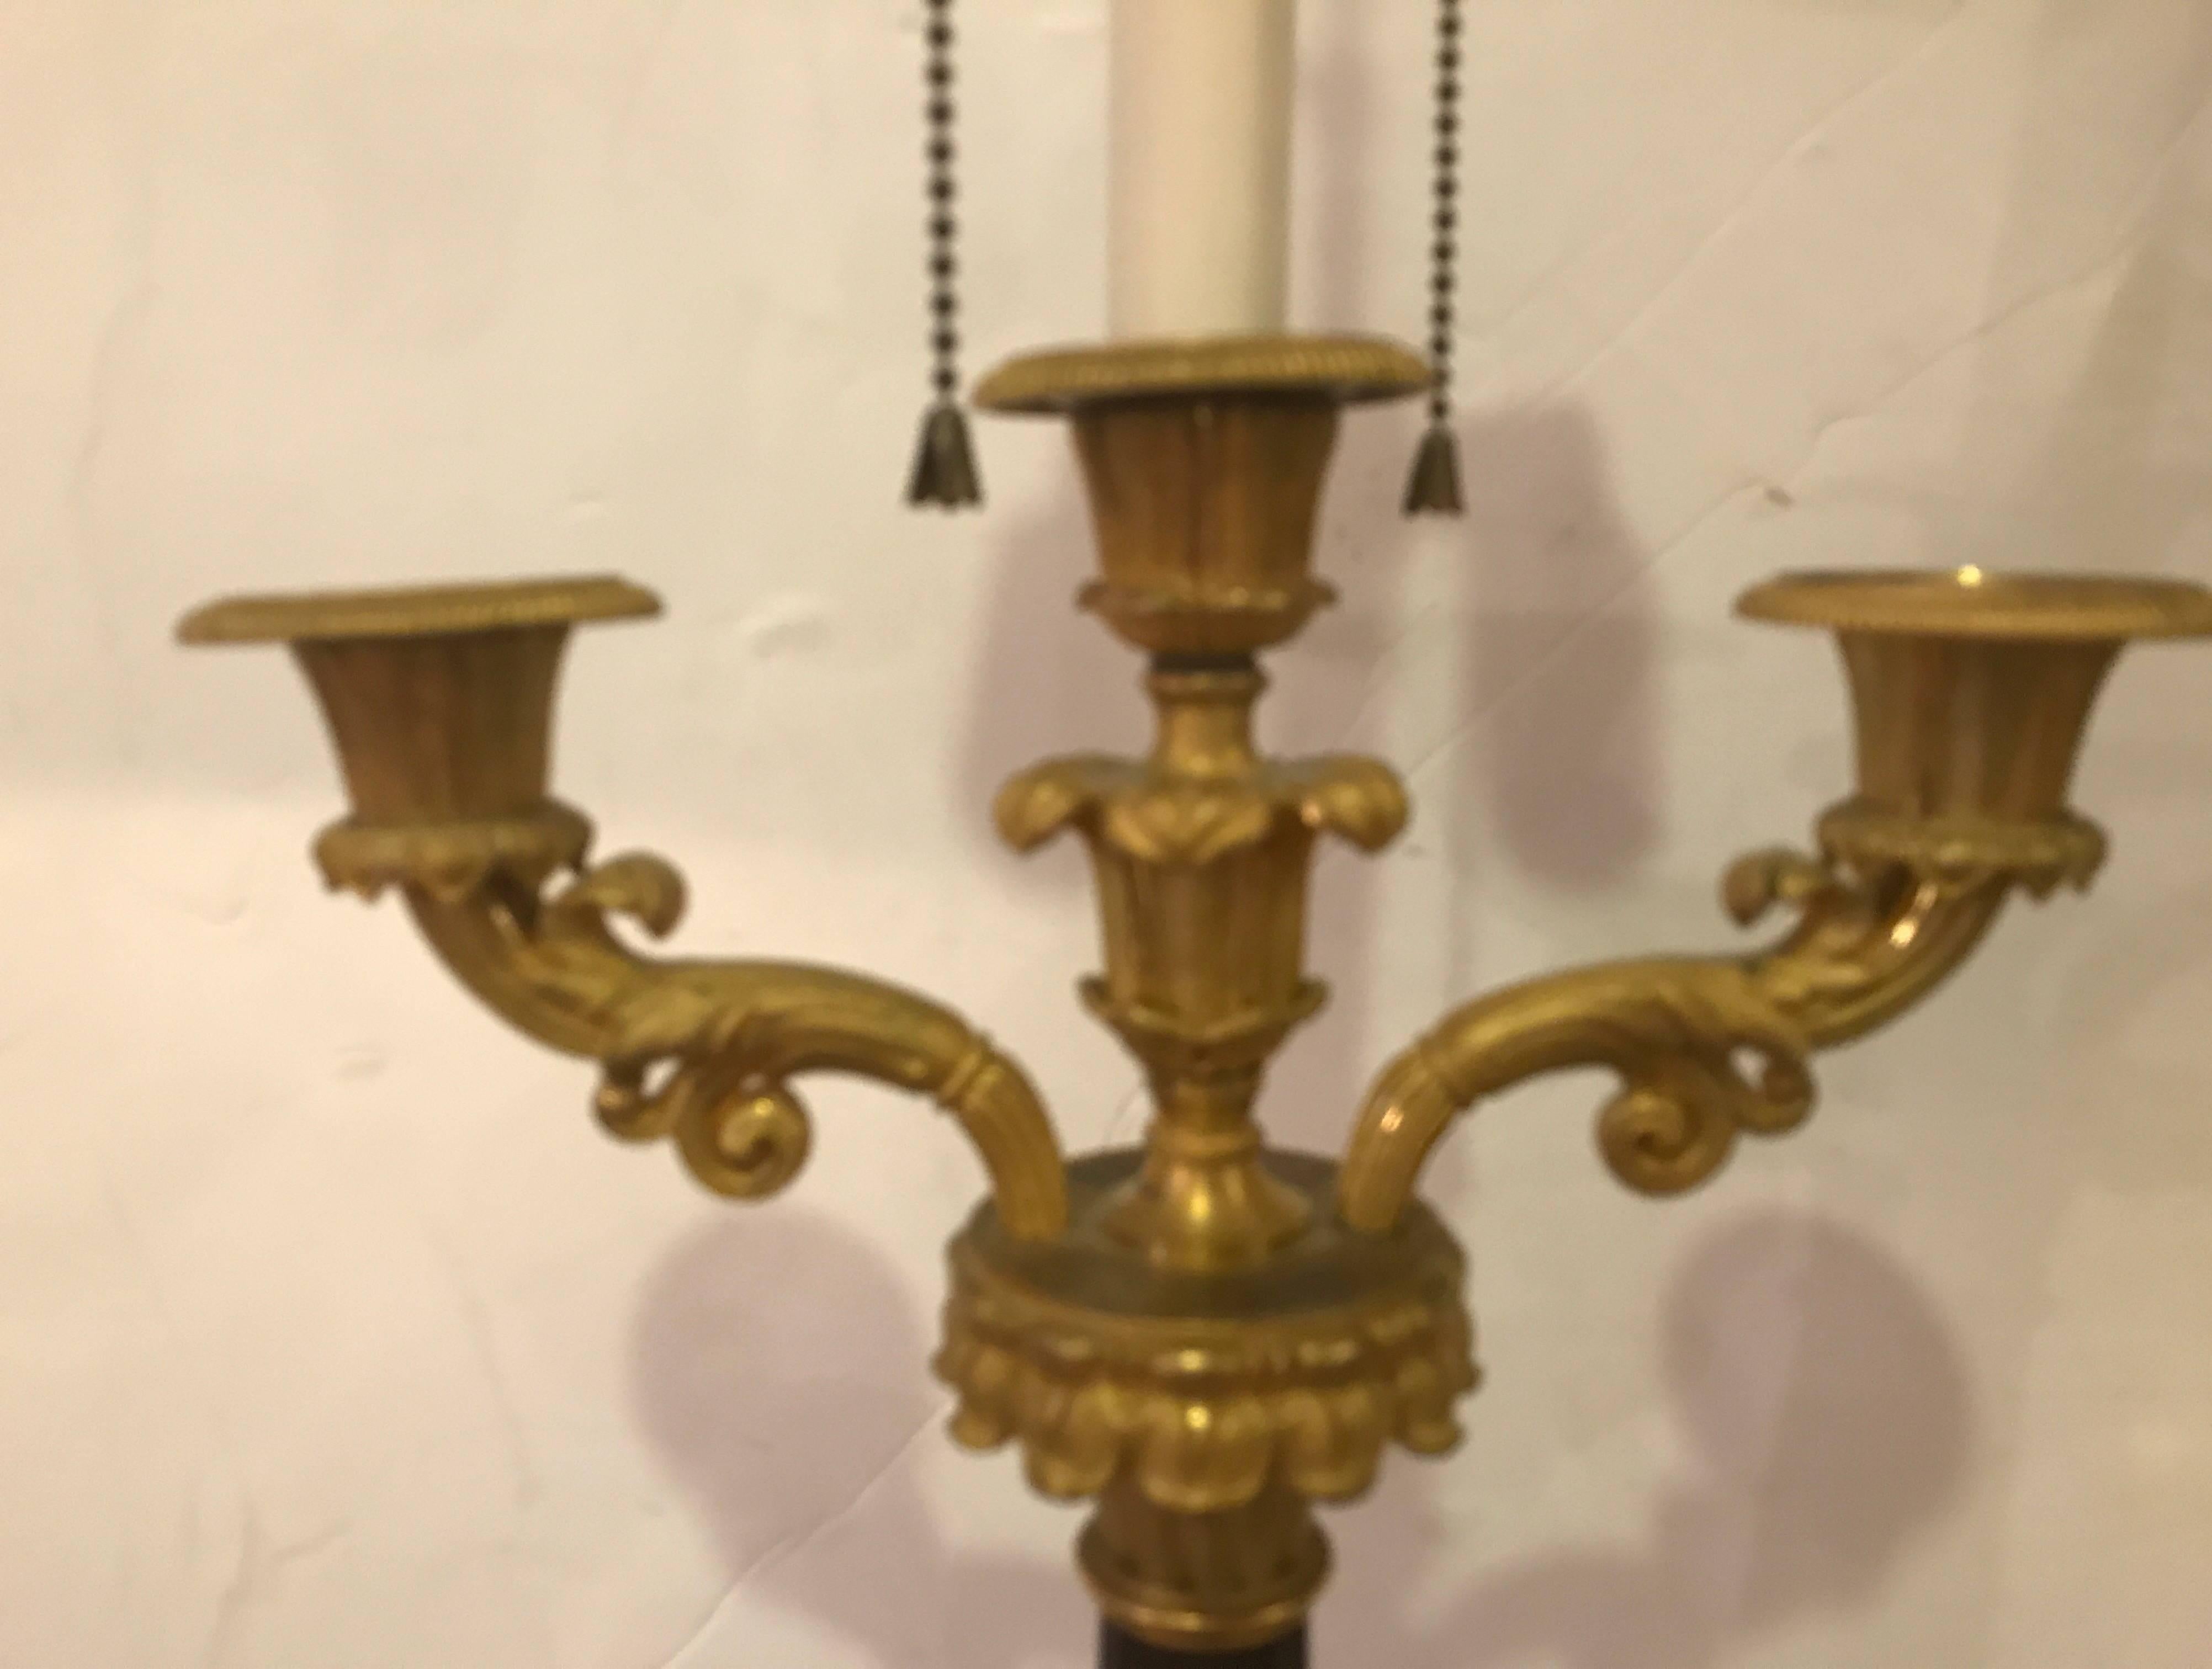 Late 19th Century 19th Century Pair of Charles X Ormolu and Bronze Candelabra Lamps